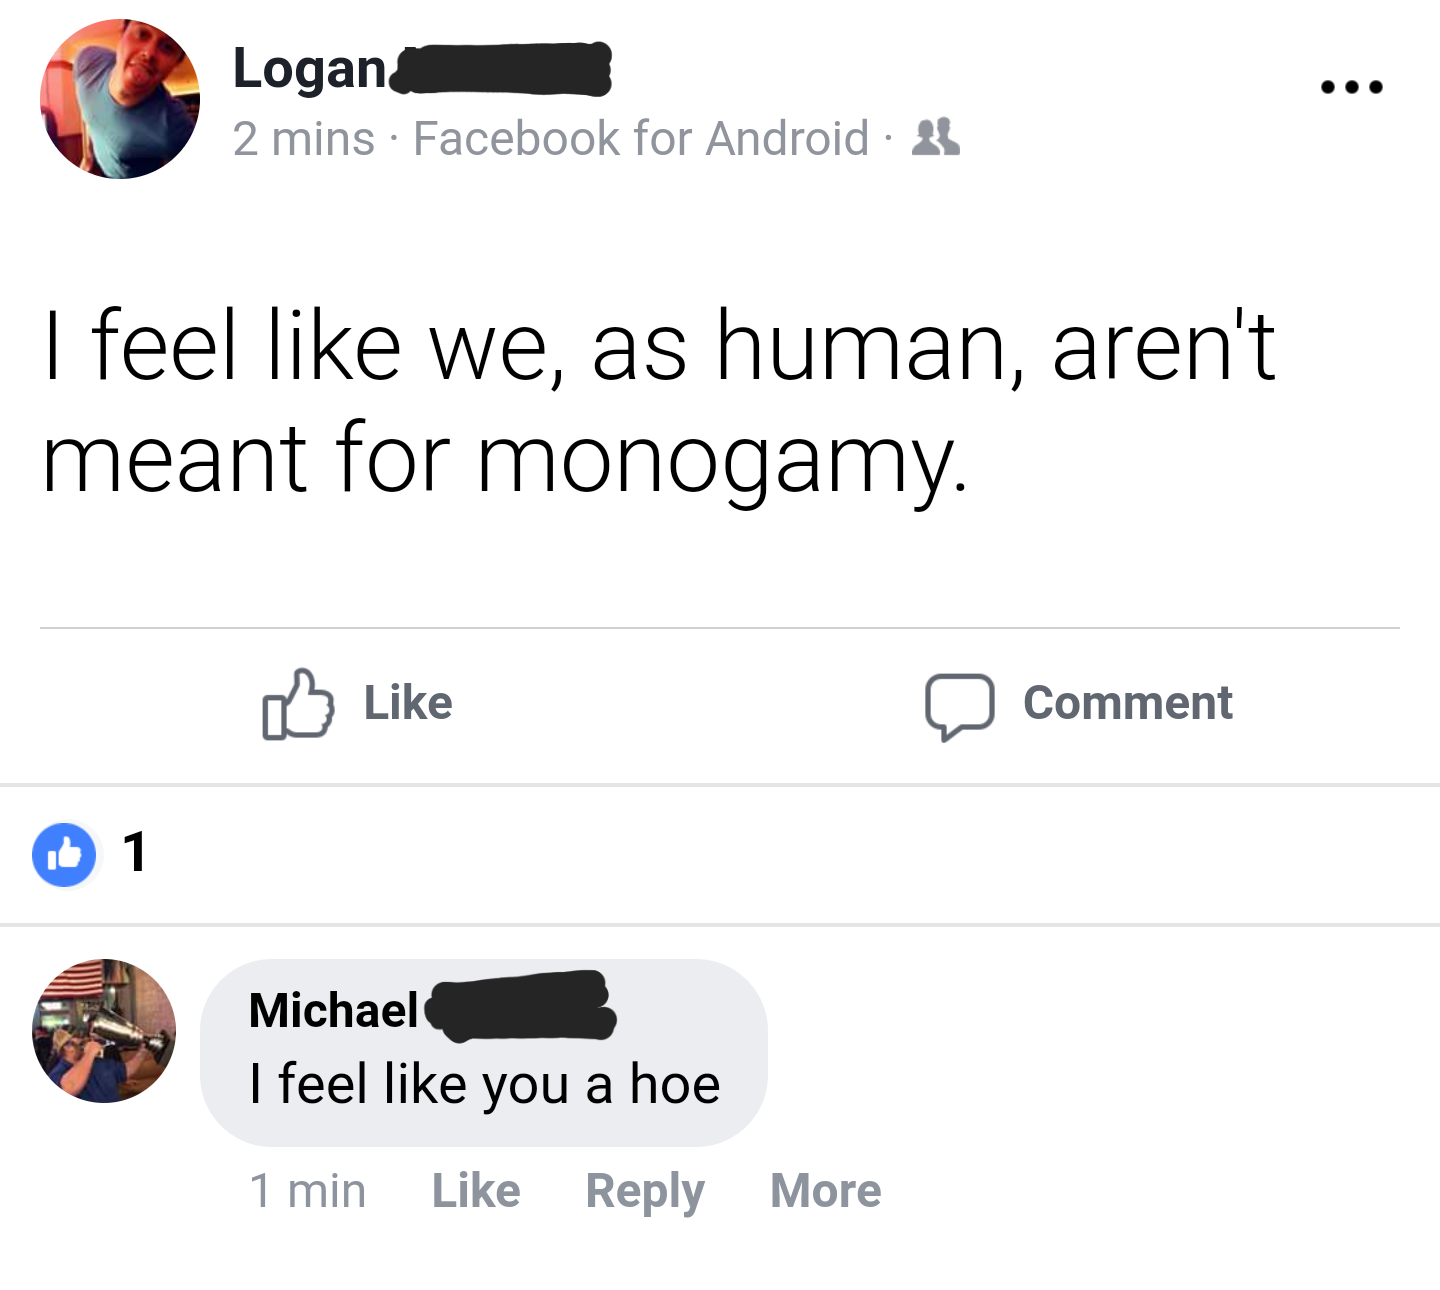 angle - Logan 2 mins Facebook for Android 3 I feel we, as human, aren't meant for monogamy. 0 Comment 1 Michael I feel you a hoe 1 min More